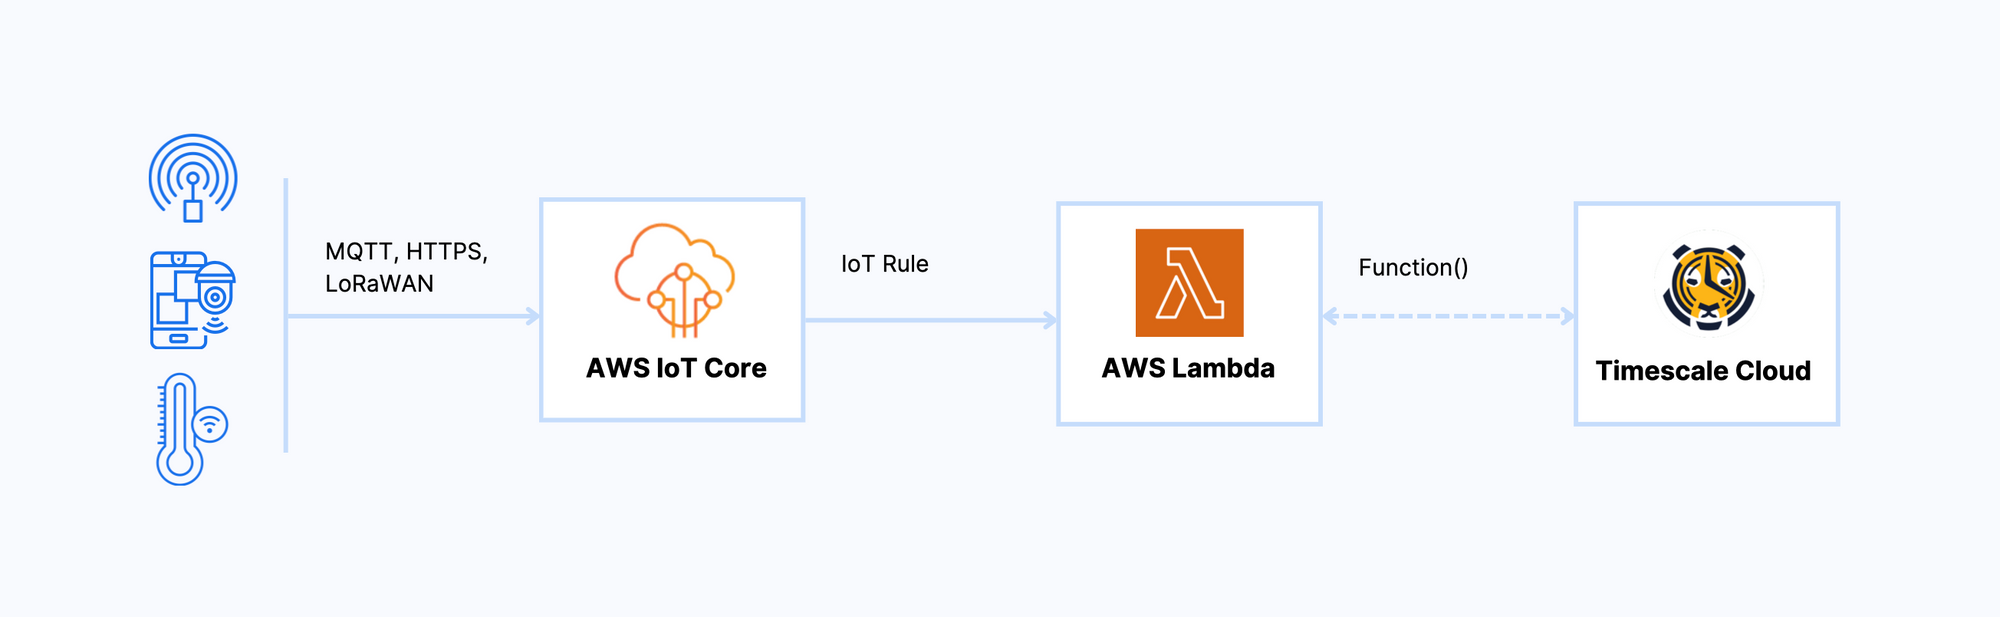 A diagram of some of the most common networking protocols, AWS IoT Core, AWS Lamda, and Timescale Cloud